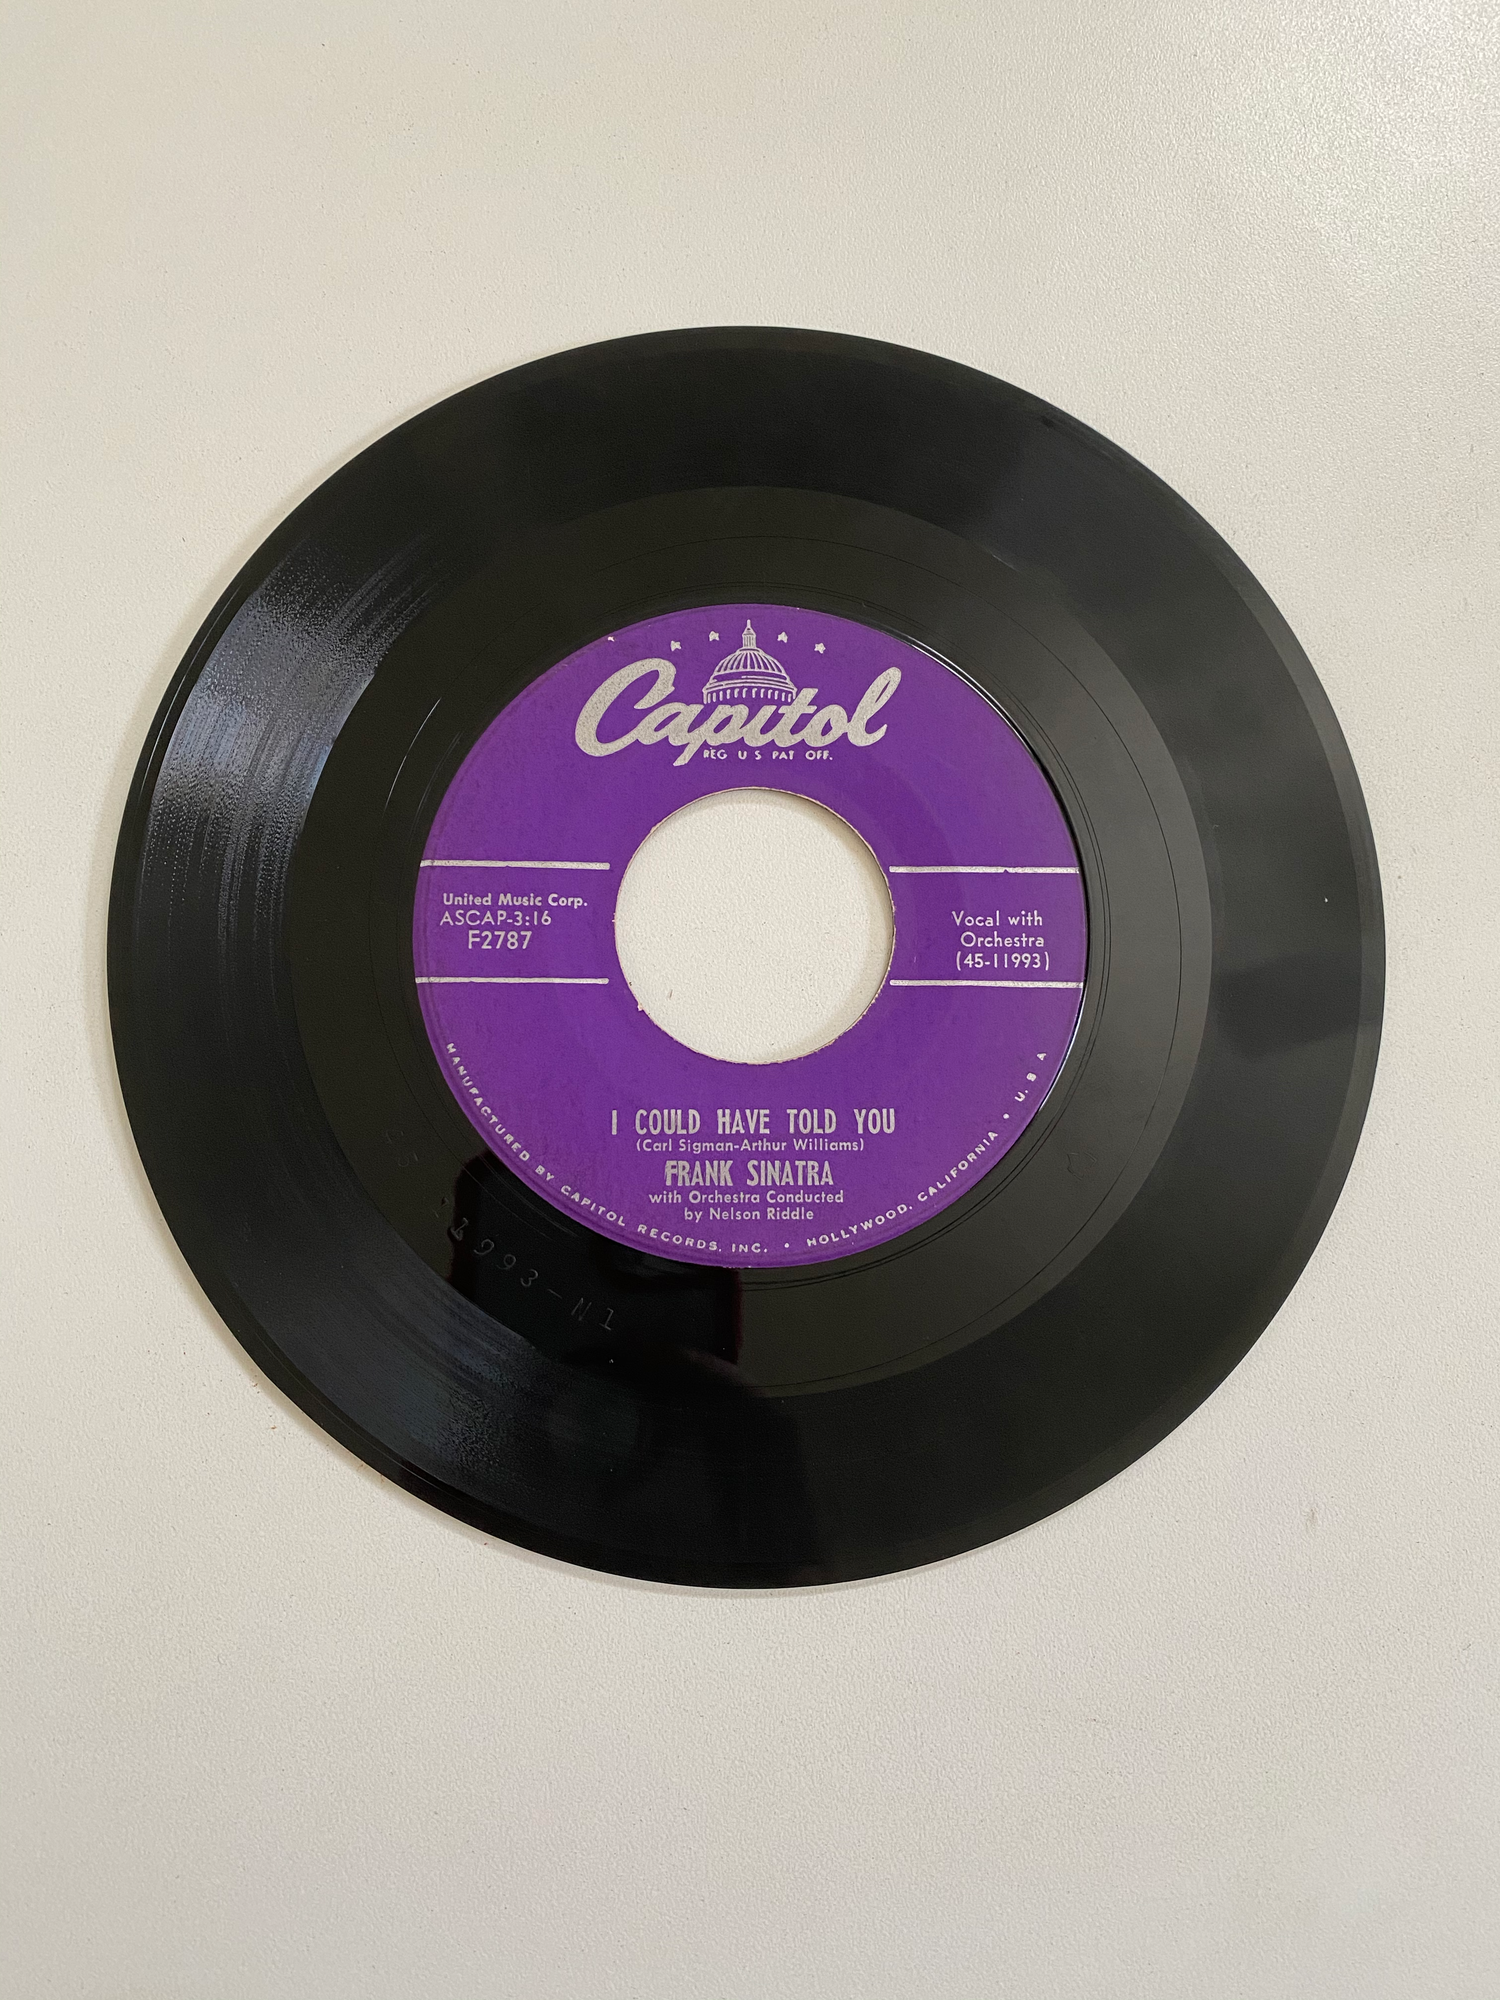 Frank Sinatra - Don't Worry About Me | 45 The Vintedge Co.